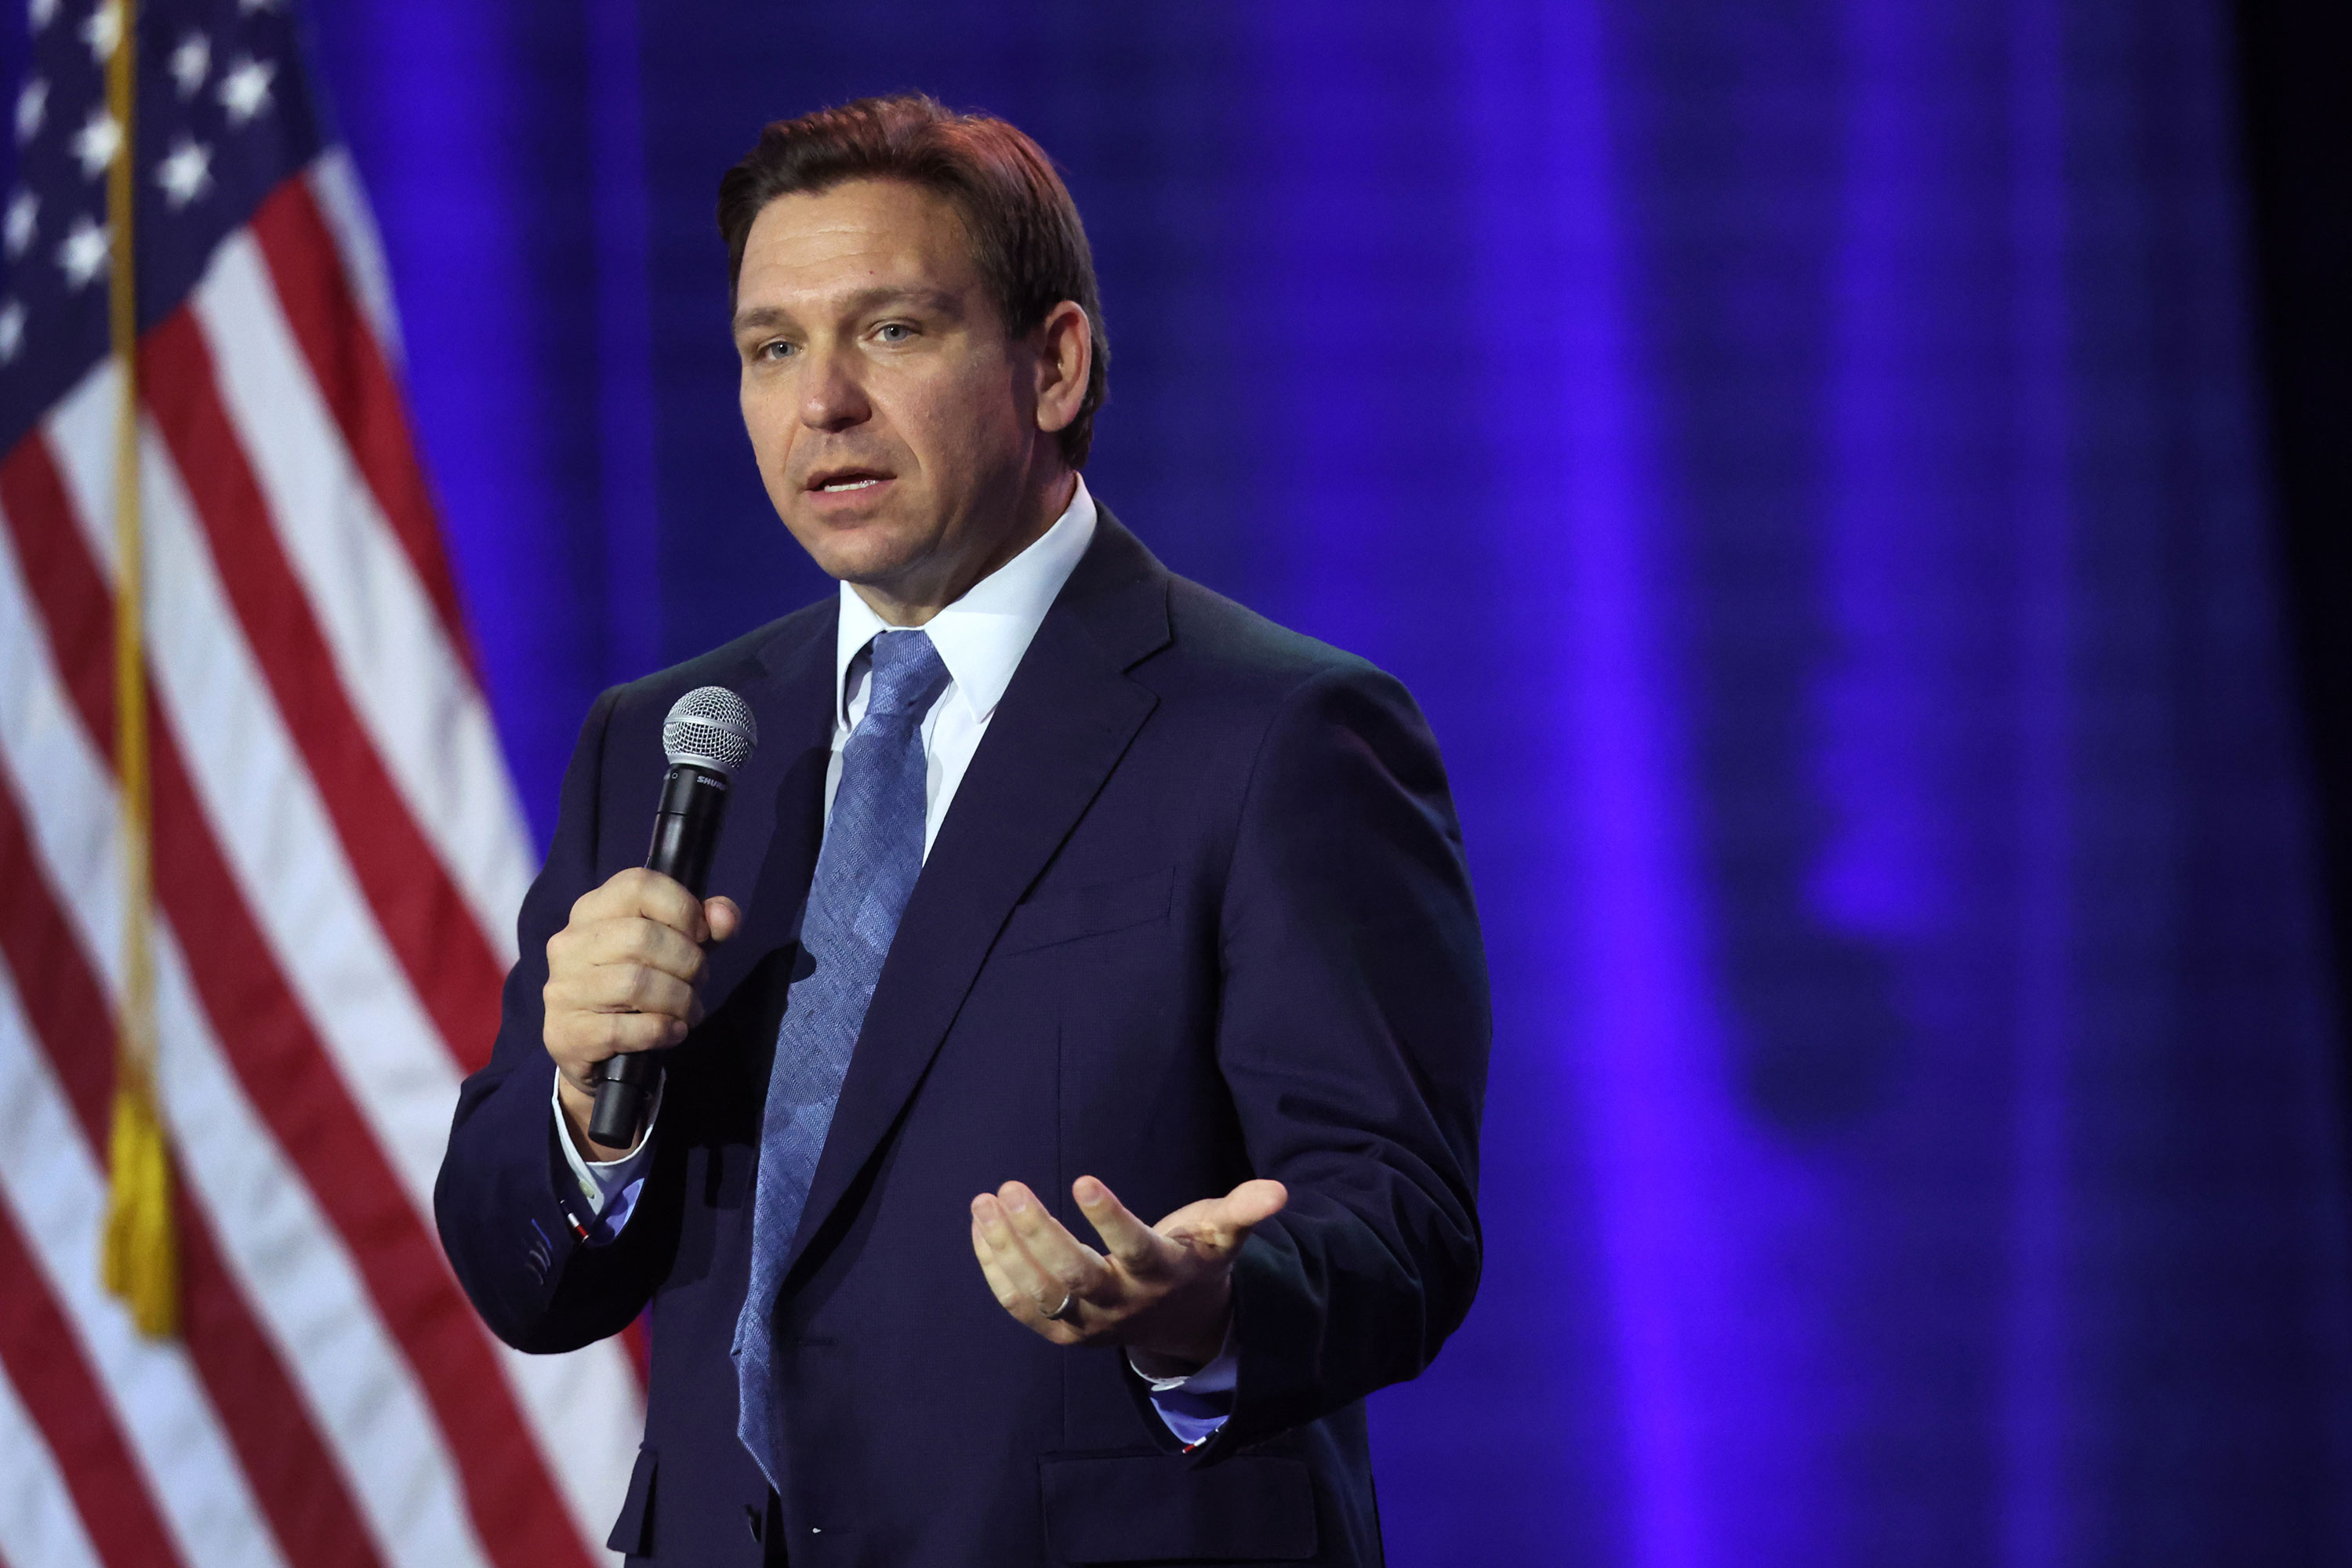 Florida Gov. Ron DeSantis at an event in Des Moines, Iowa, on March 10. (Scott Olson/Getty Images/FILE)